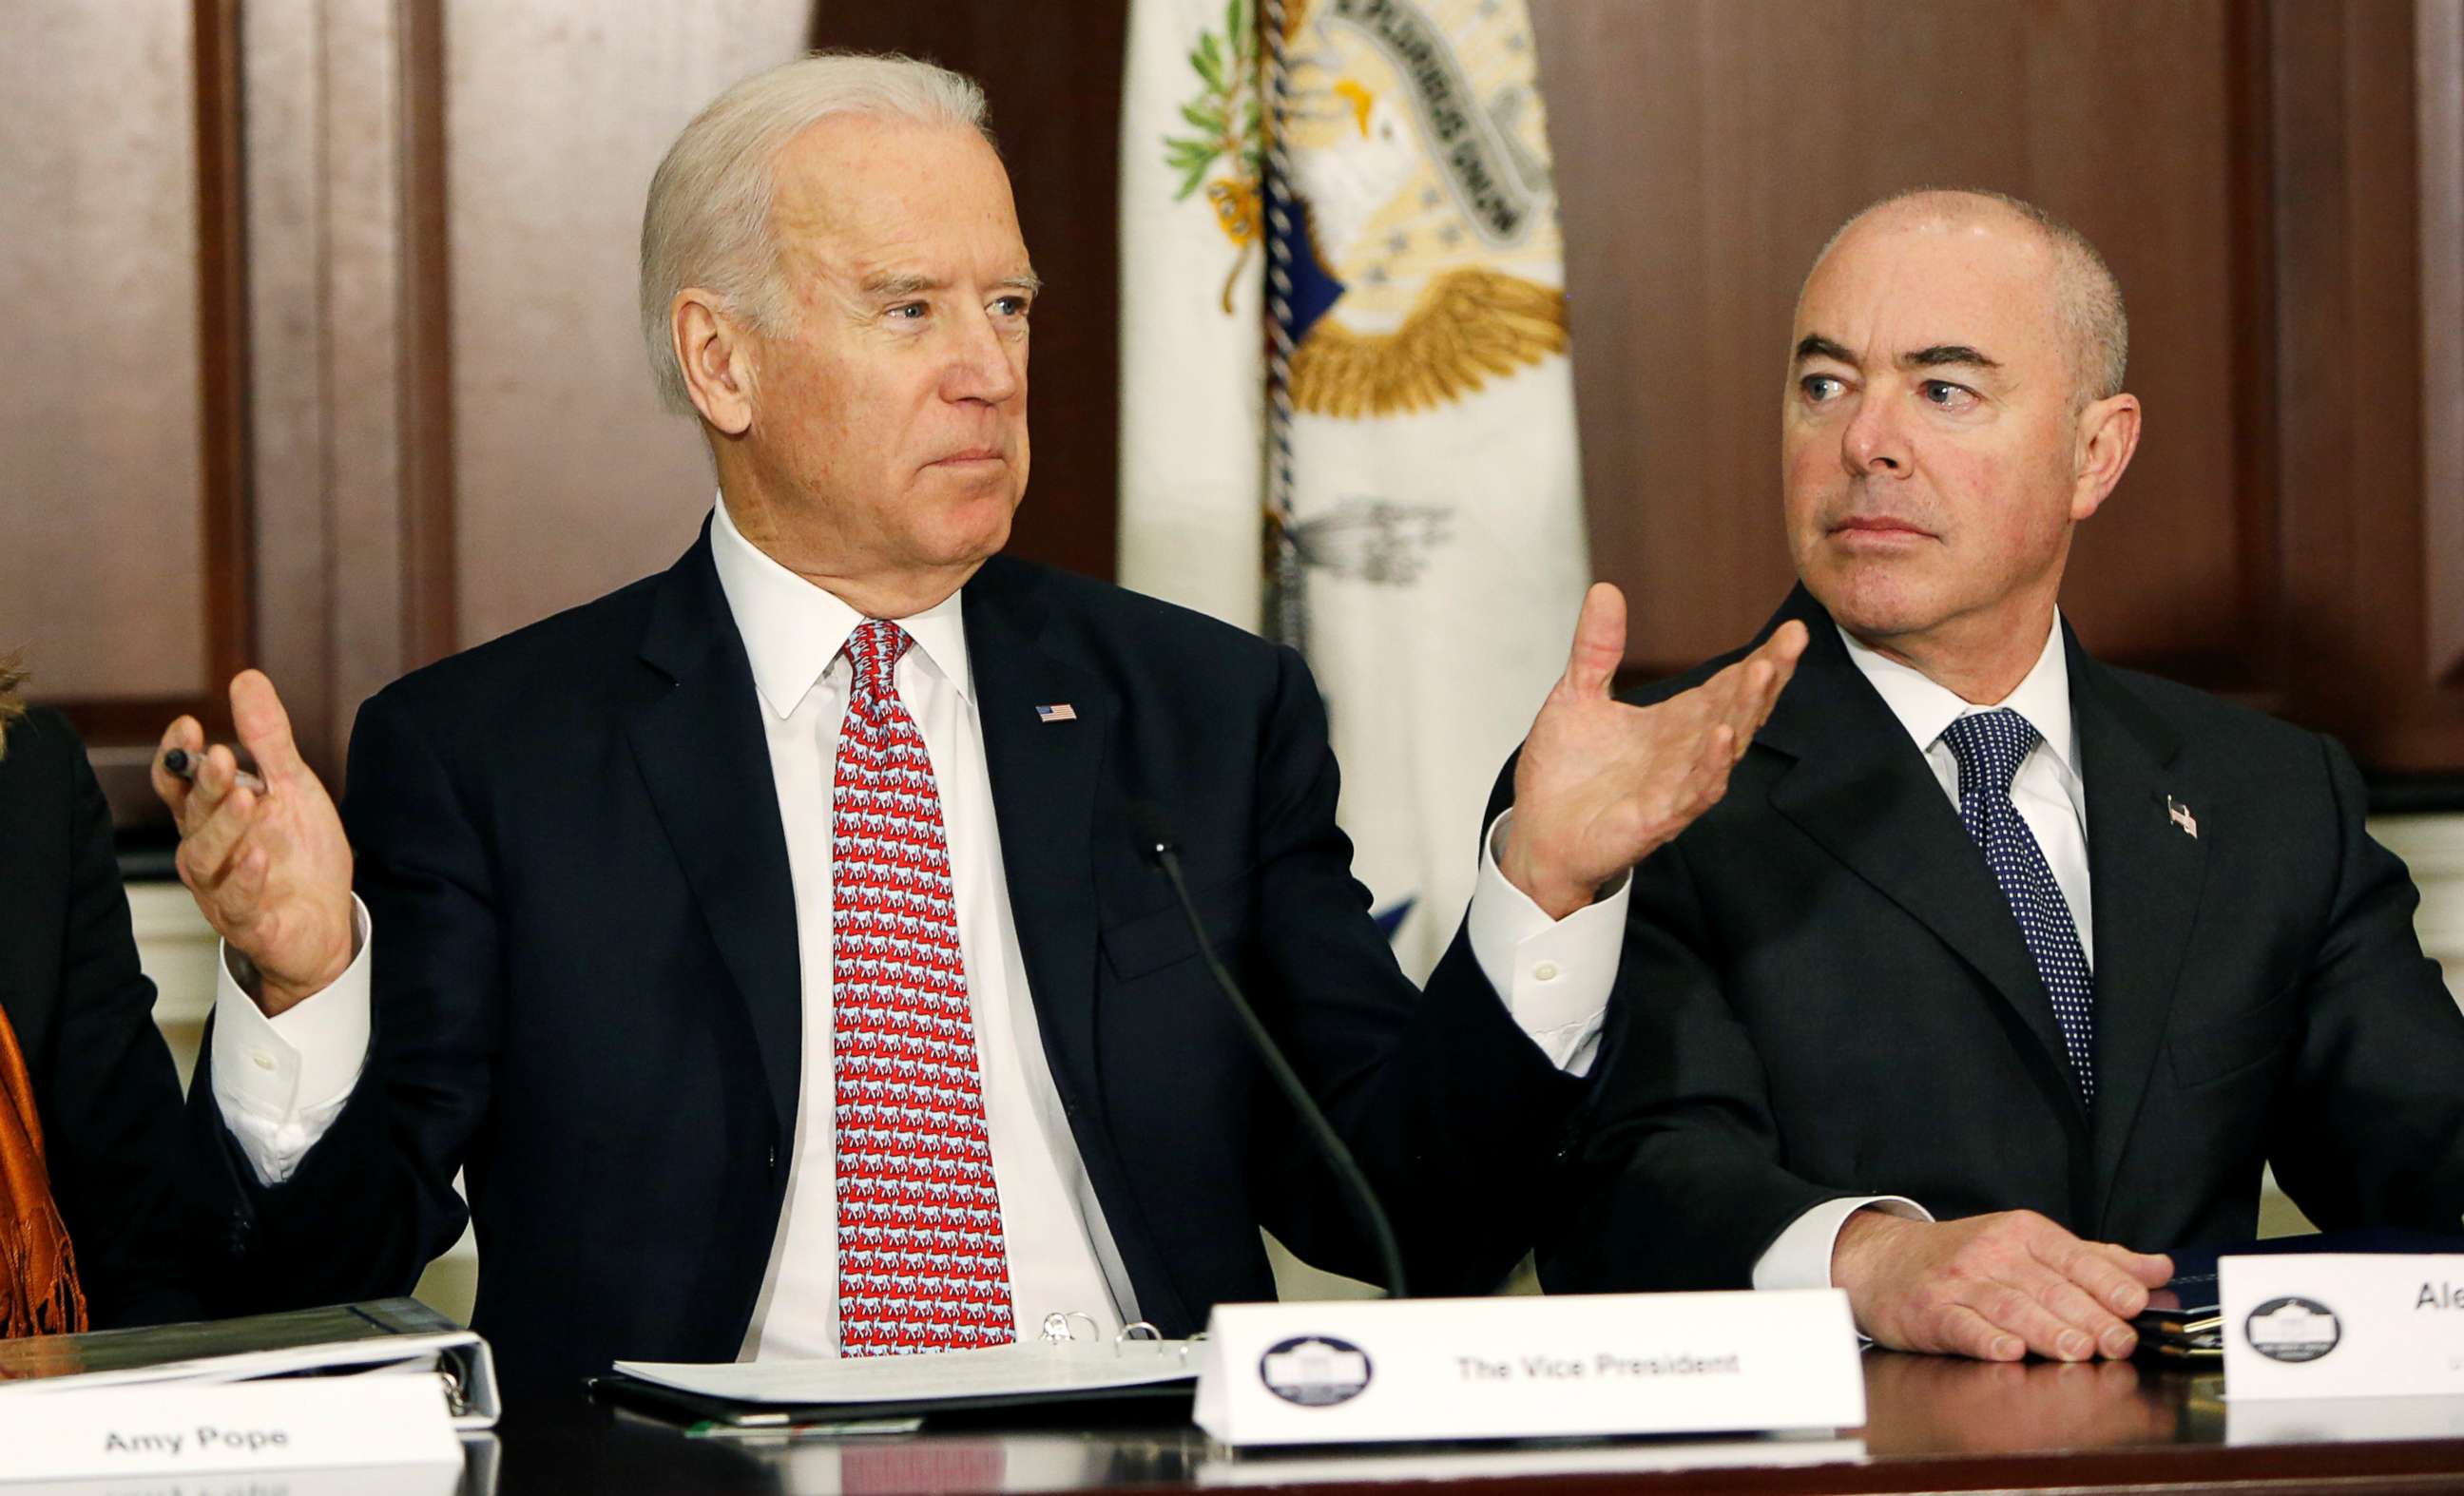 PHOTO: Vice President Joe Biden delivers remarks while attending a roundtable on countering violent extremism at the White House, Feb. 17, 2015, as Deputy Secretary of the Department of Homeland Security Alejandro Mayorkas listens.     